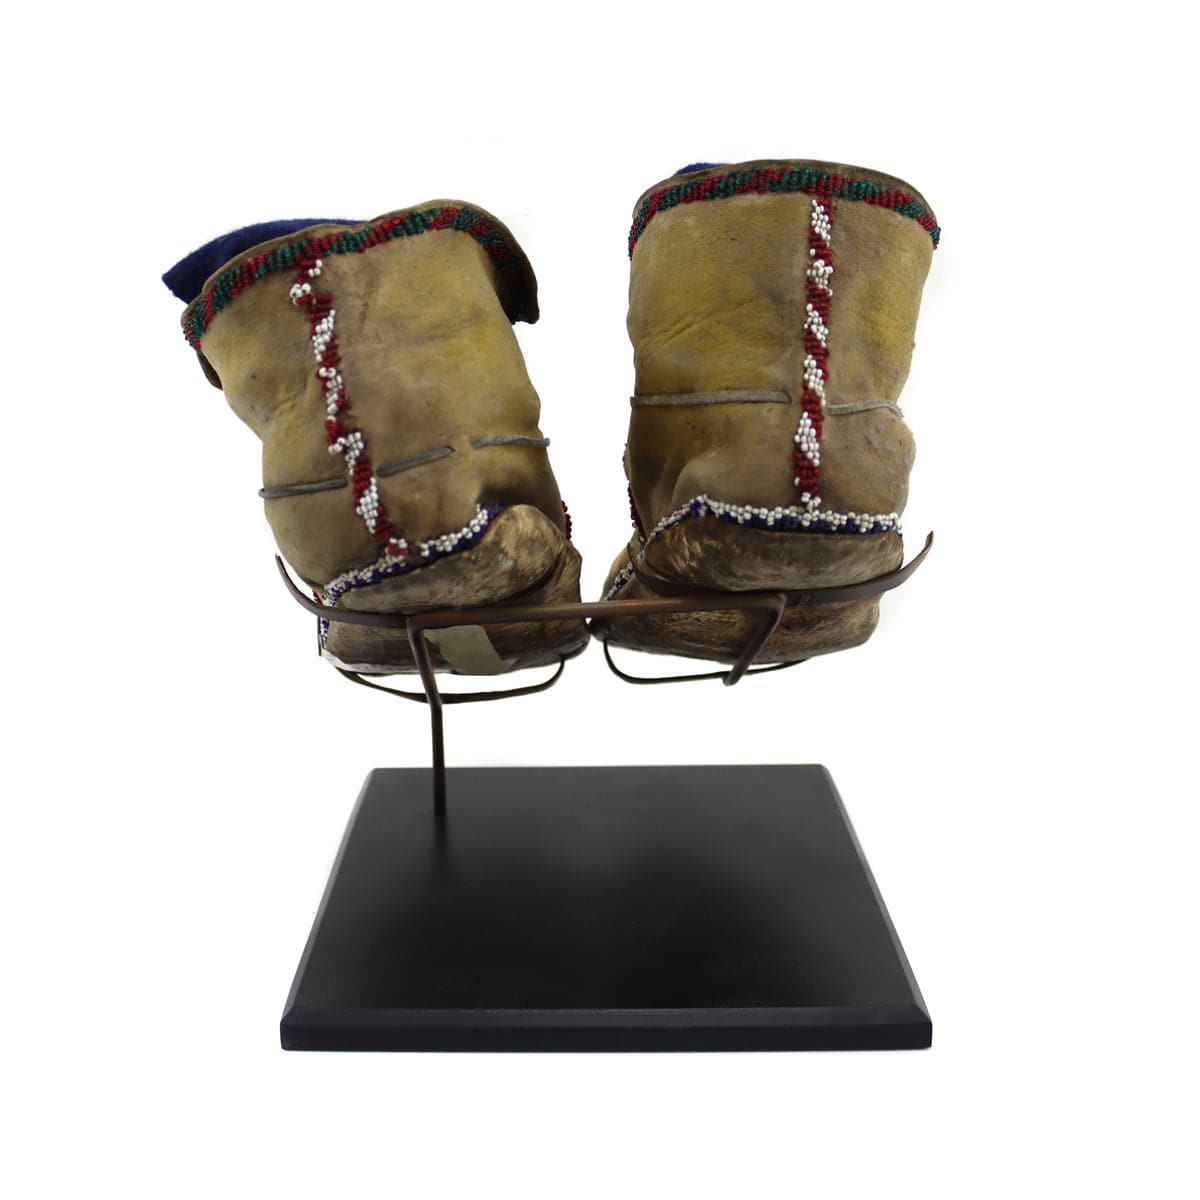 Apache Beaded Leather Moccasins c. Late 19th Century, 5" x 10" x 4" - Includes Custom Stand (DW90354B-0123-004) 2